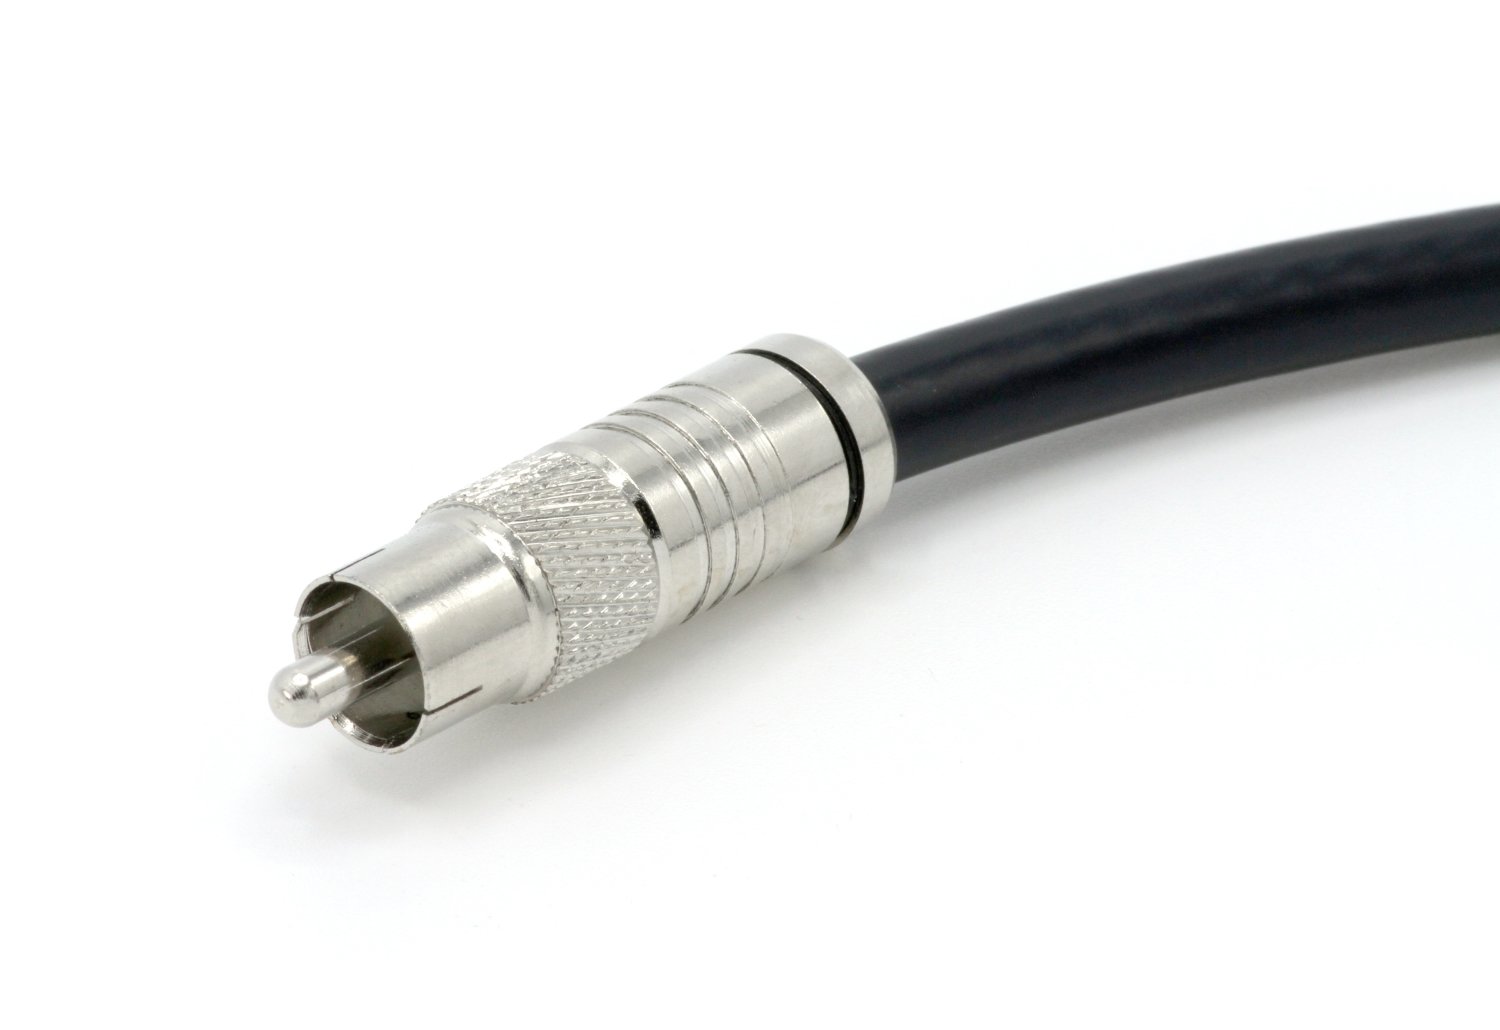 THE CIMPLE CO - Digital Audio Coaxial Cable - Subwoofer Cable - (S/PDIF) RCA Cable, 150 Feet - image 2 of 6